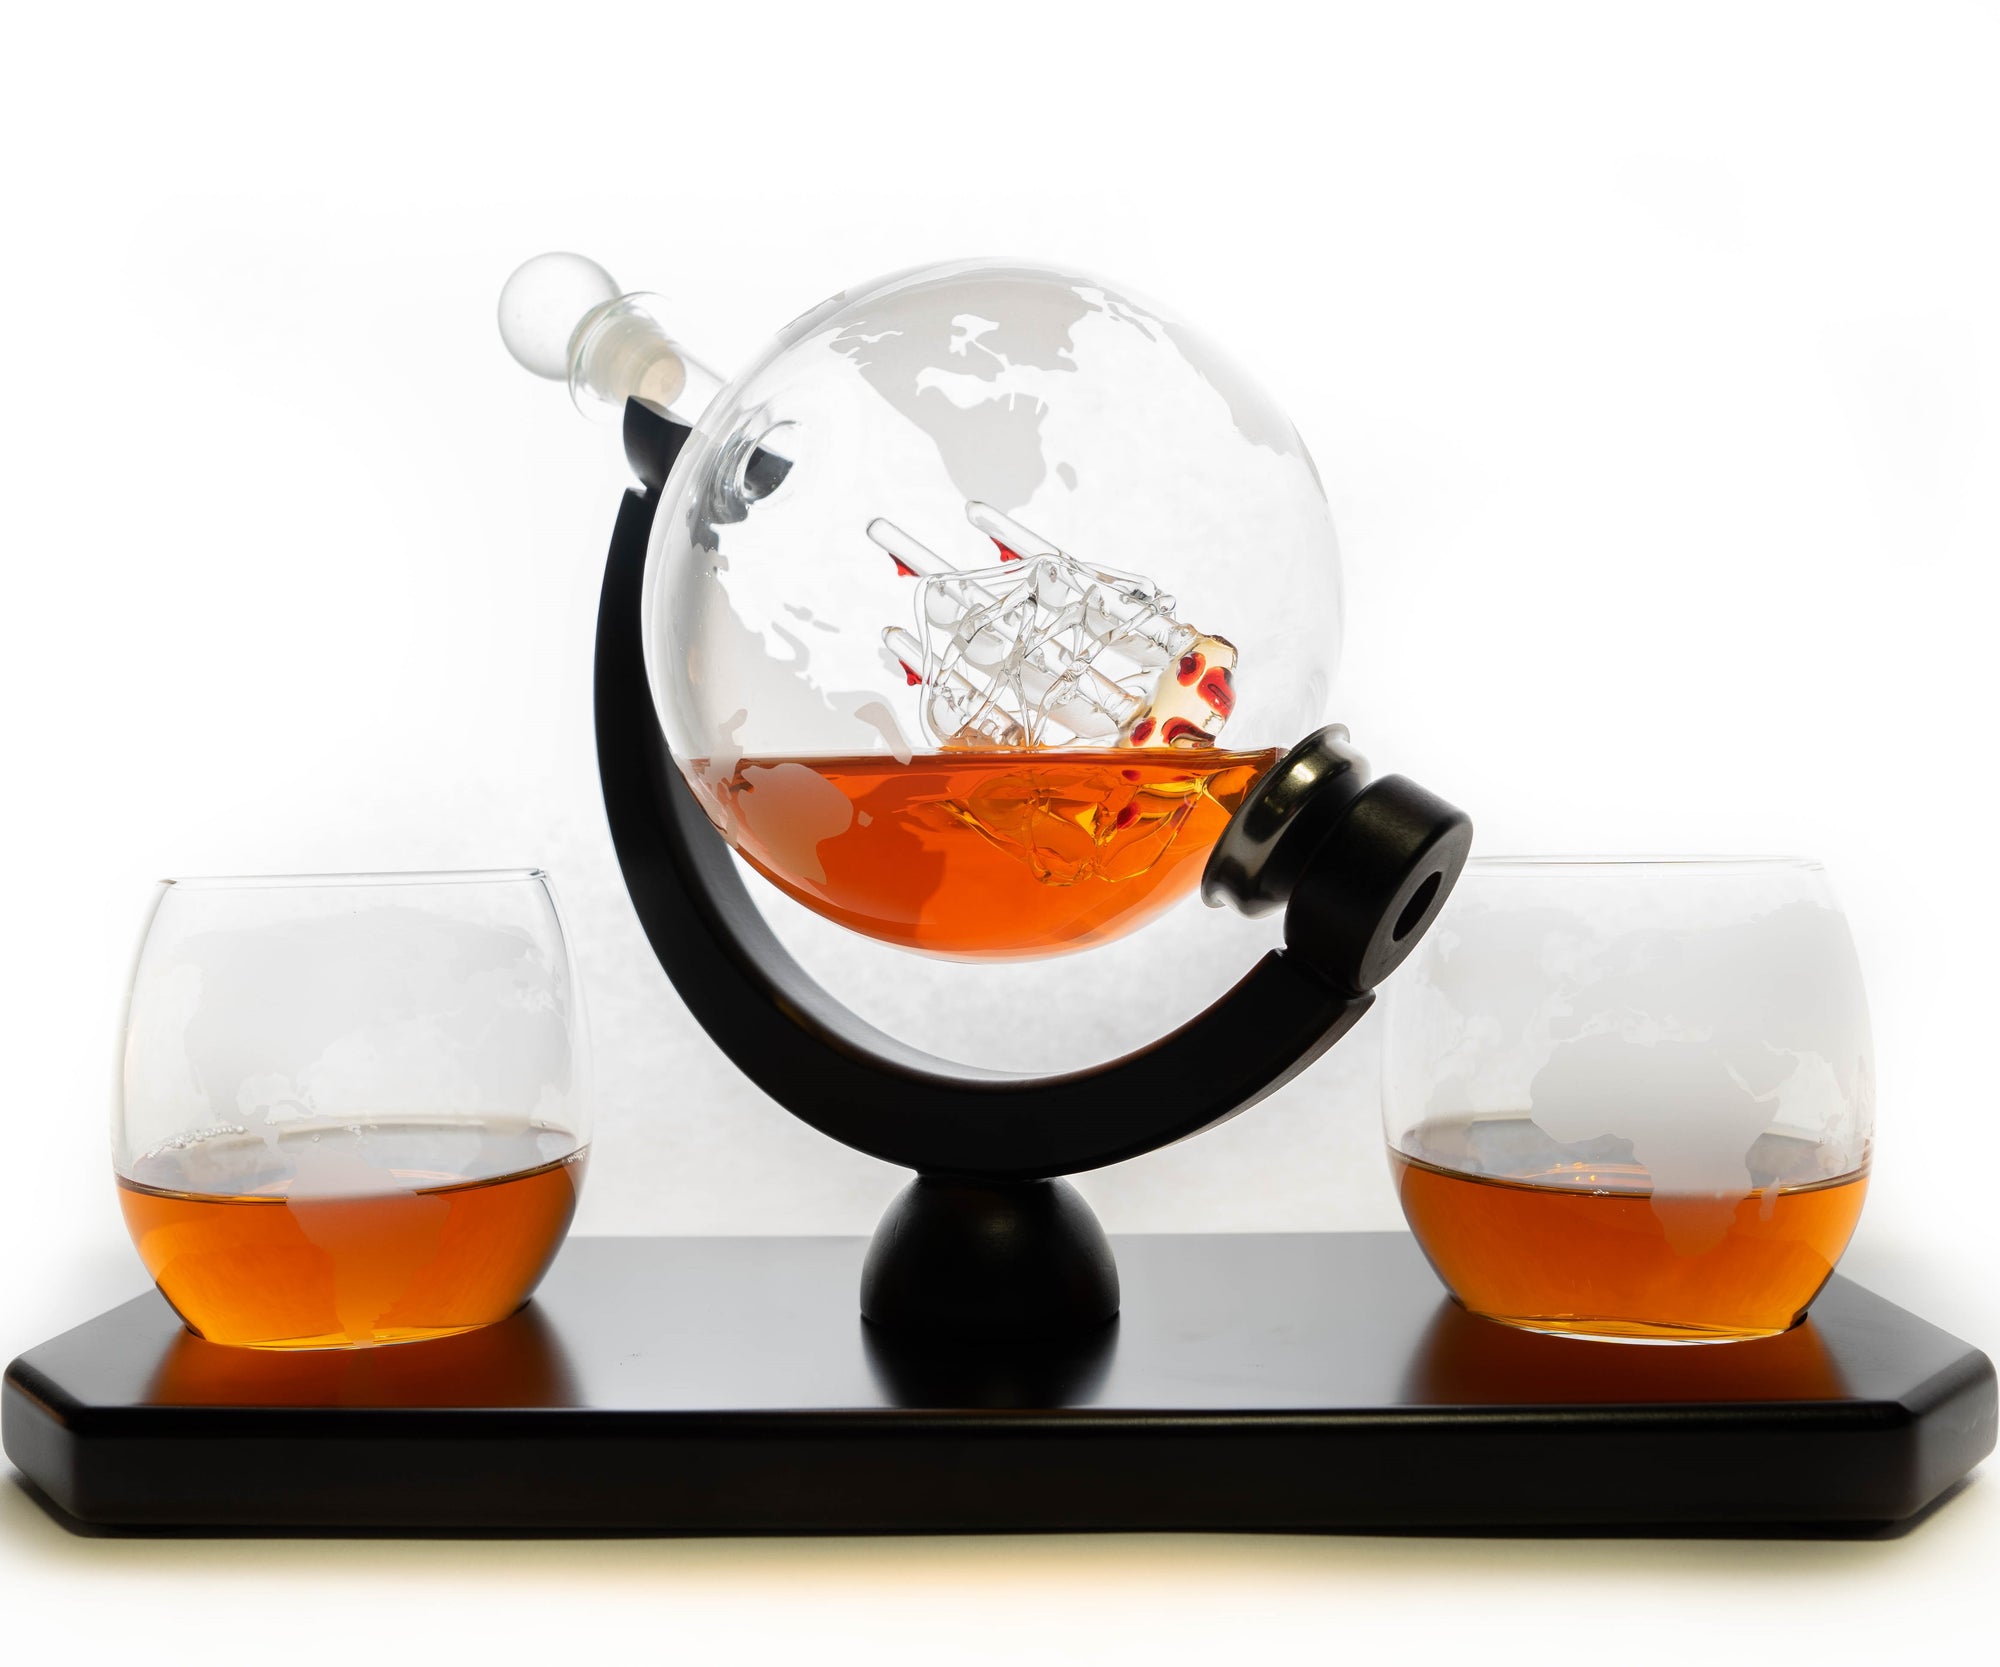 Personalized Globe Decanter Set with Two Twist Scotch Glasses - Chic Makings